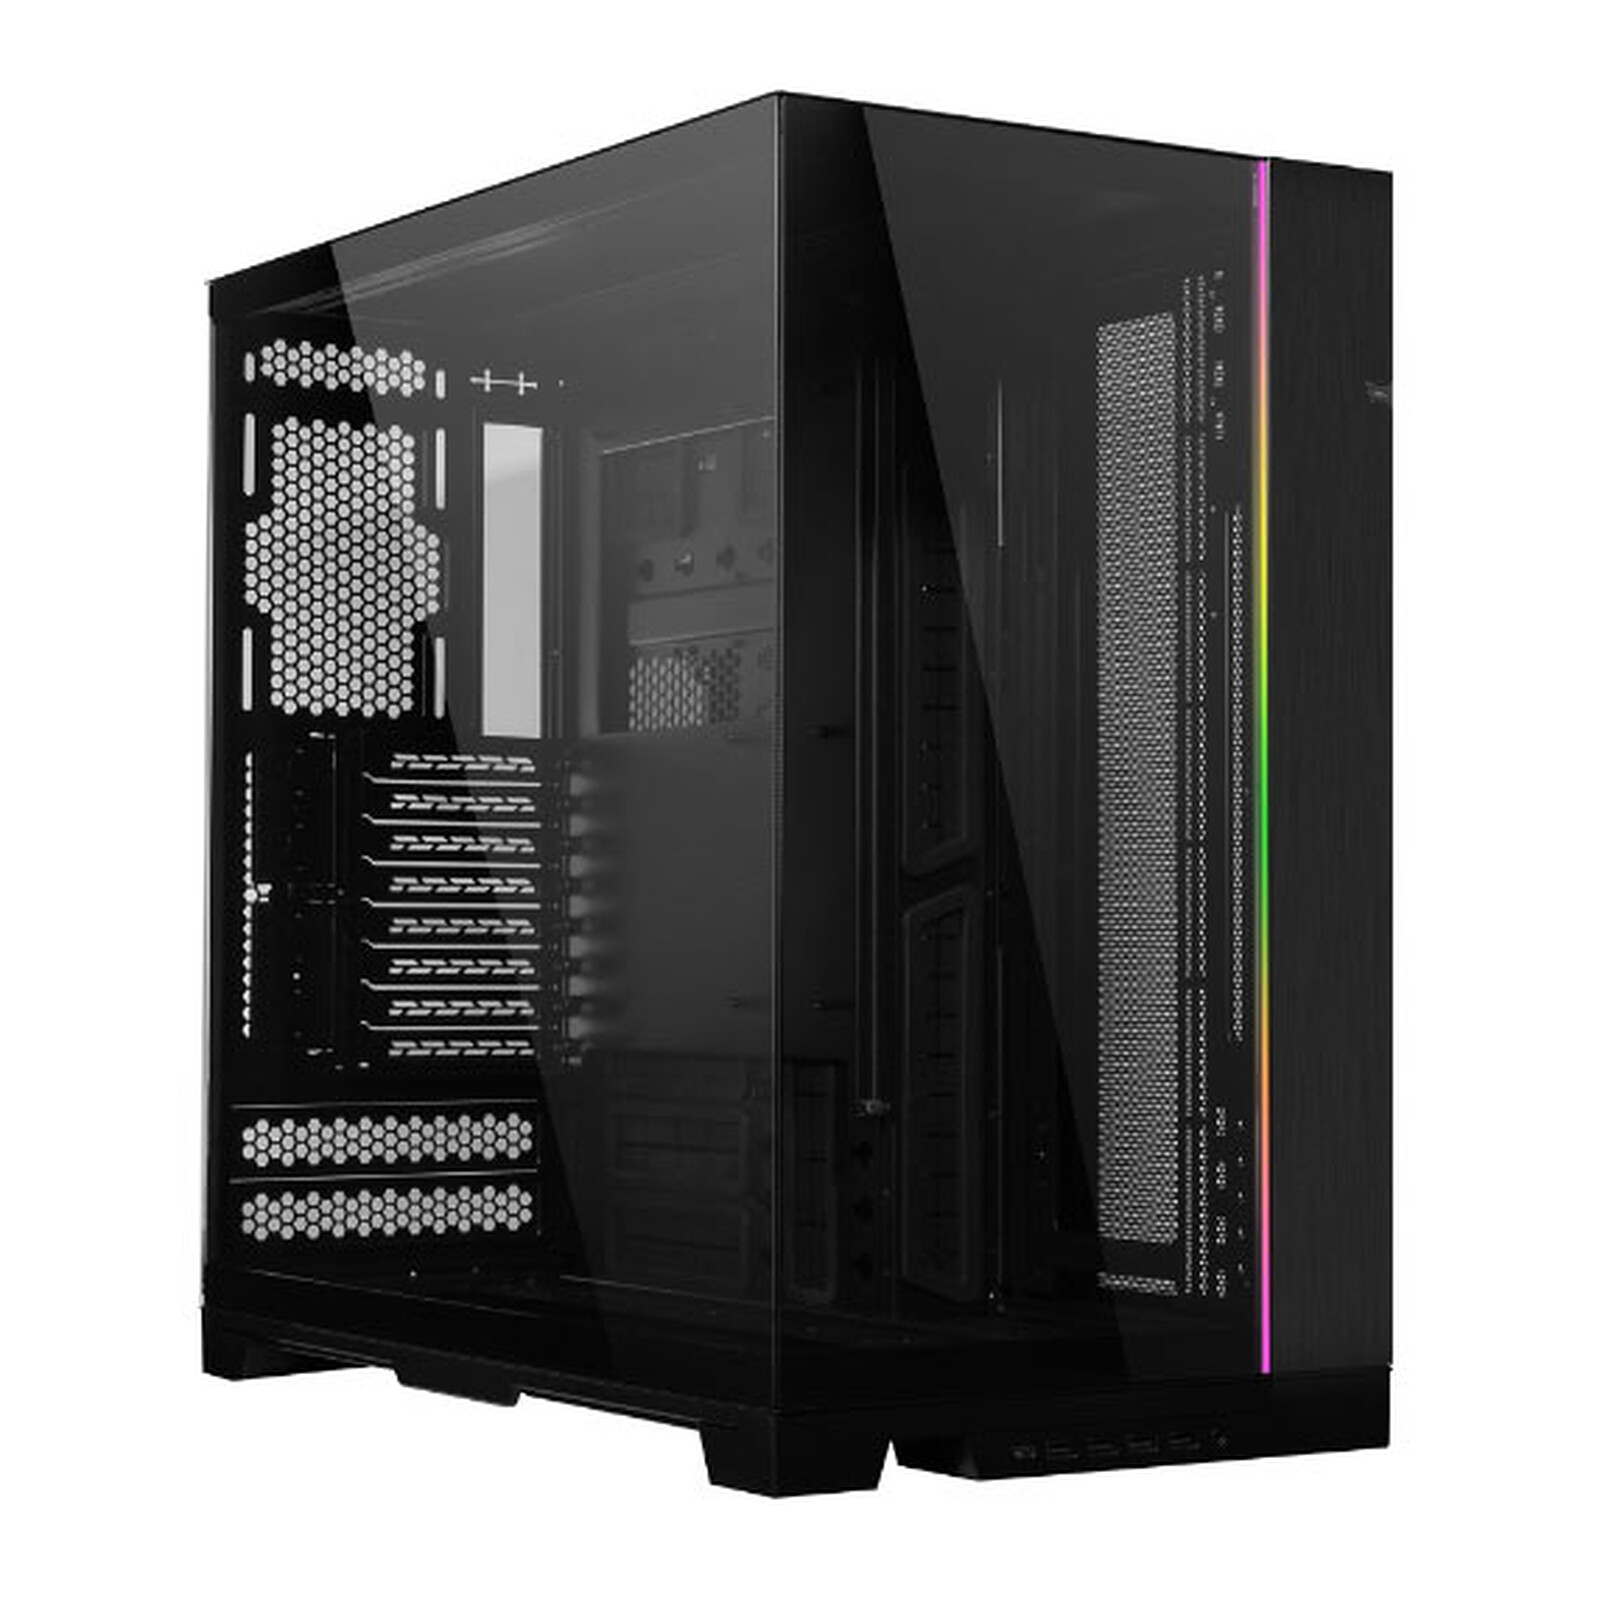 O11D EVO FRONT MESH KIT – LIAN LI is a Leading Provider of PC Cases